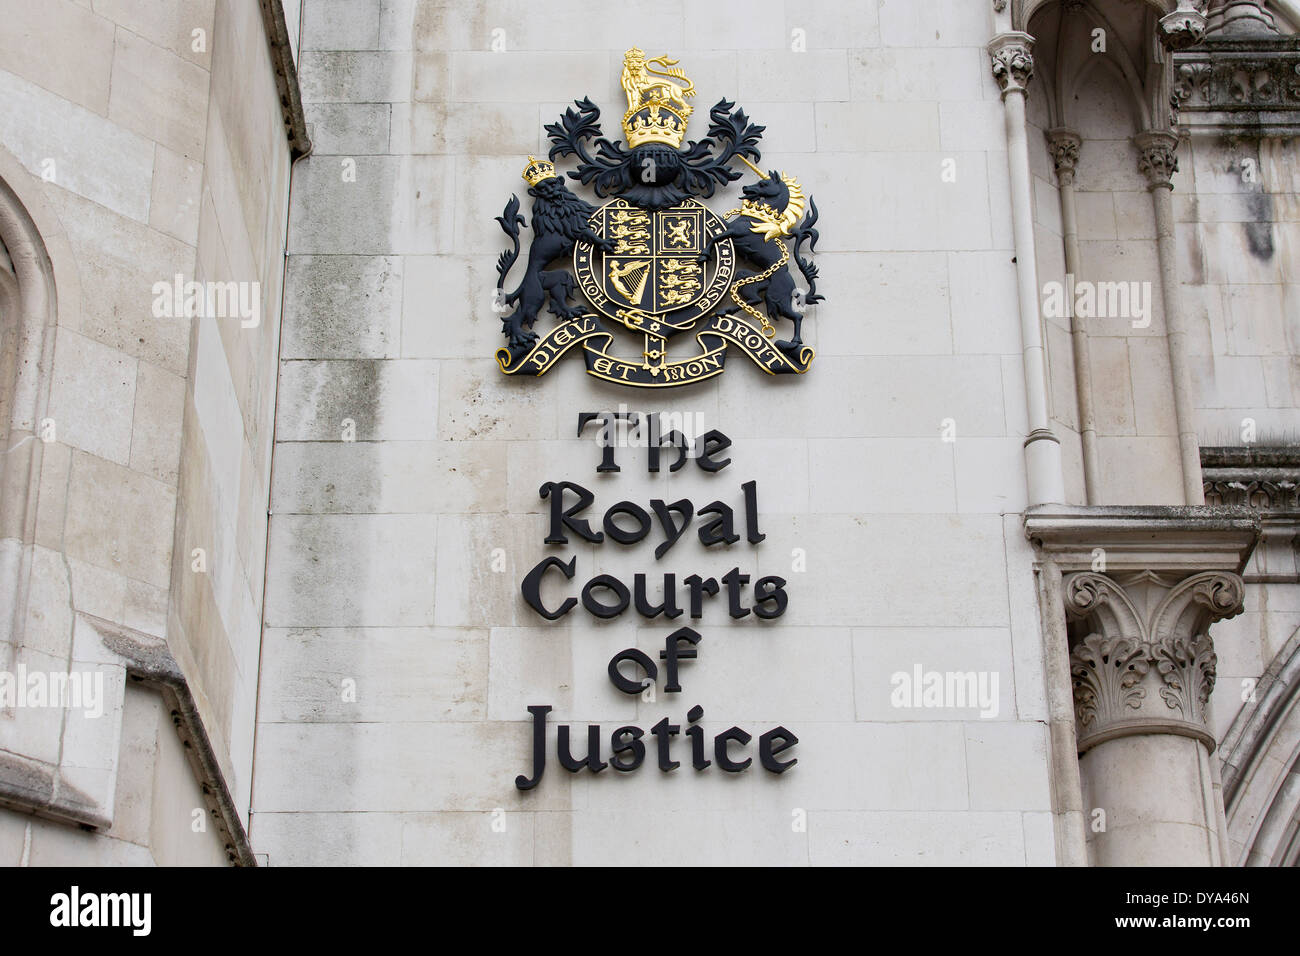 The Royal Courts of Justice, commonly called the Law Courts, London, UK. Stock Photo